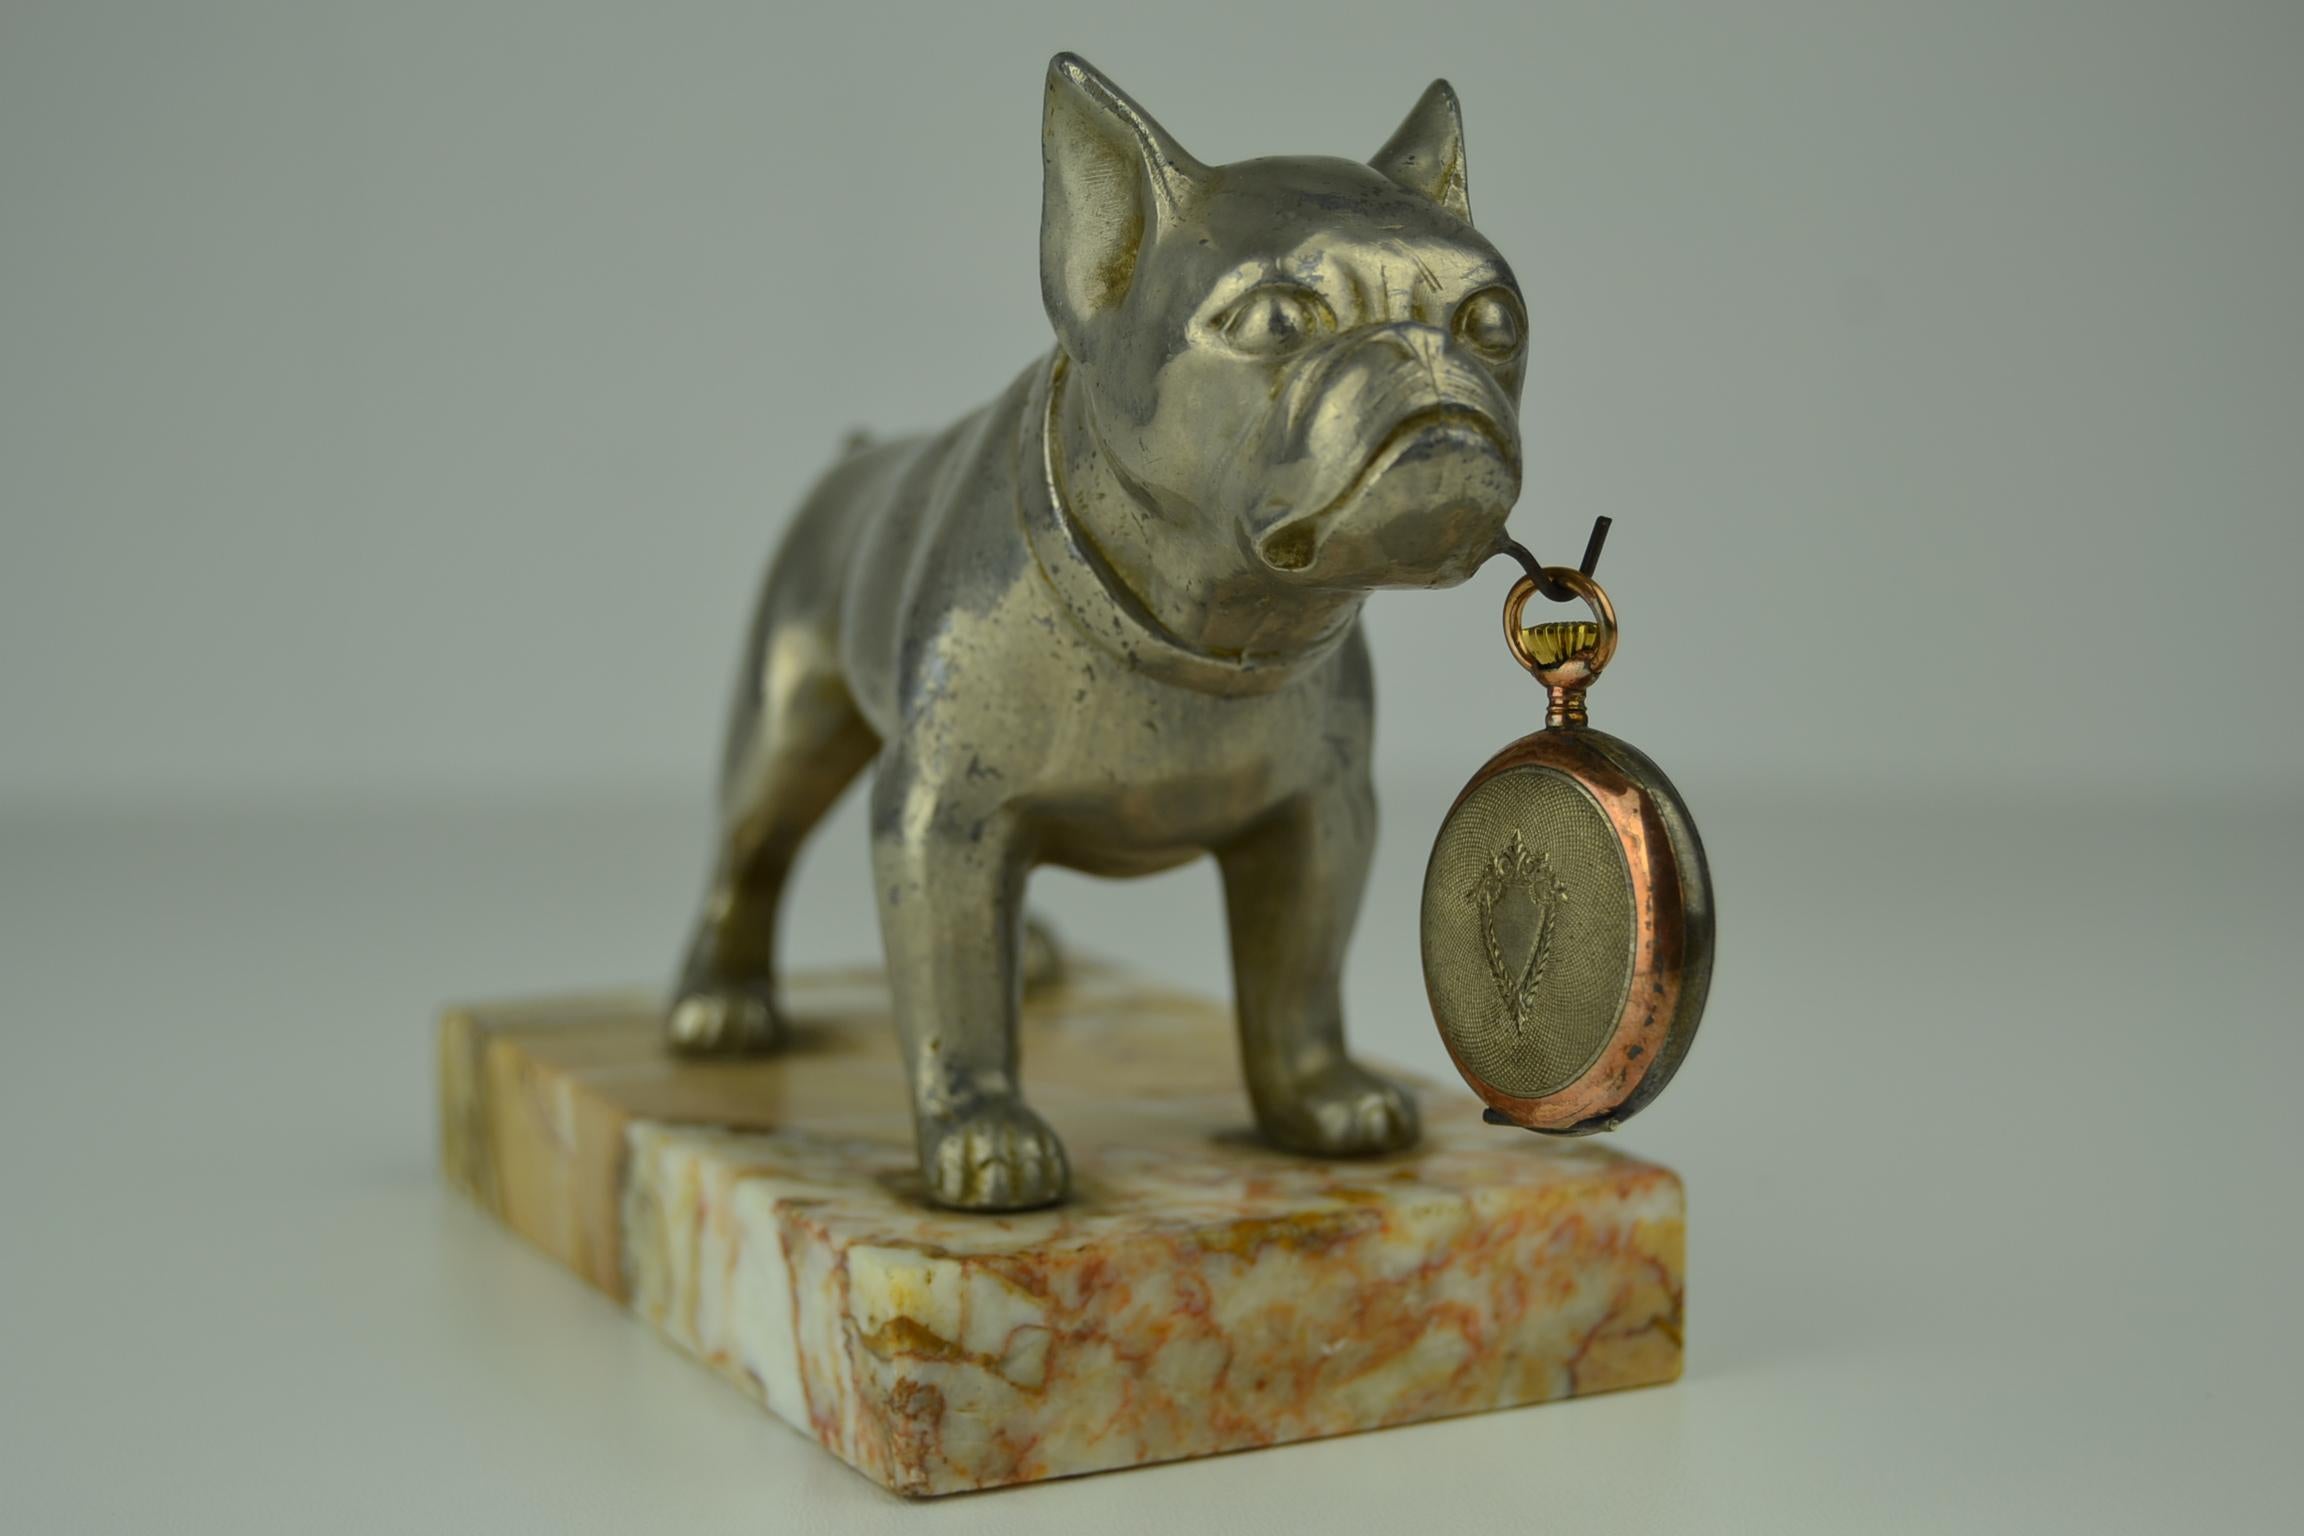 Art Deco dog figural pocket watch holder, dog watch holder, pocket watch stand mounted on marble base.
Silver metal standing bulldog, French bulldog, frenchie, dog figurine 

The pocket watch is not very old, but will be added just as